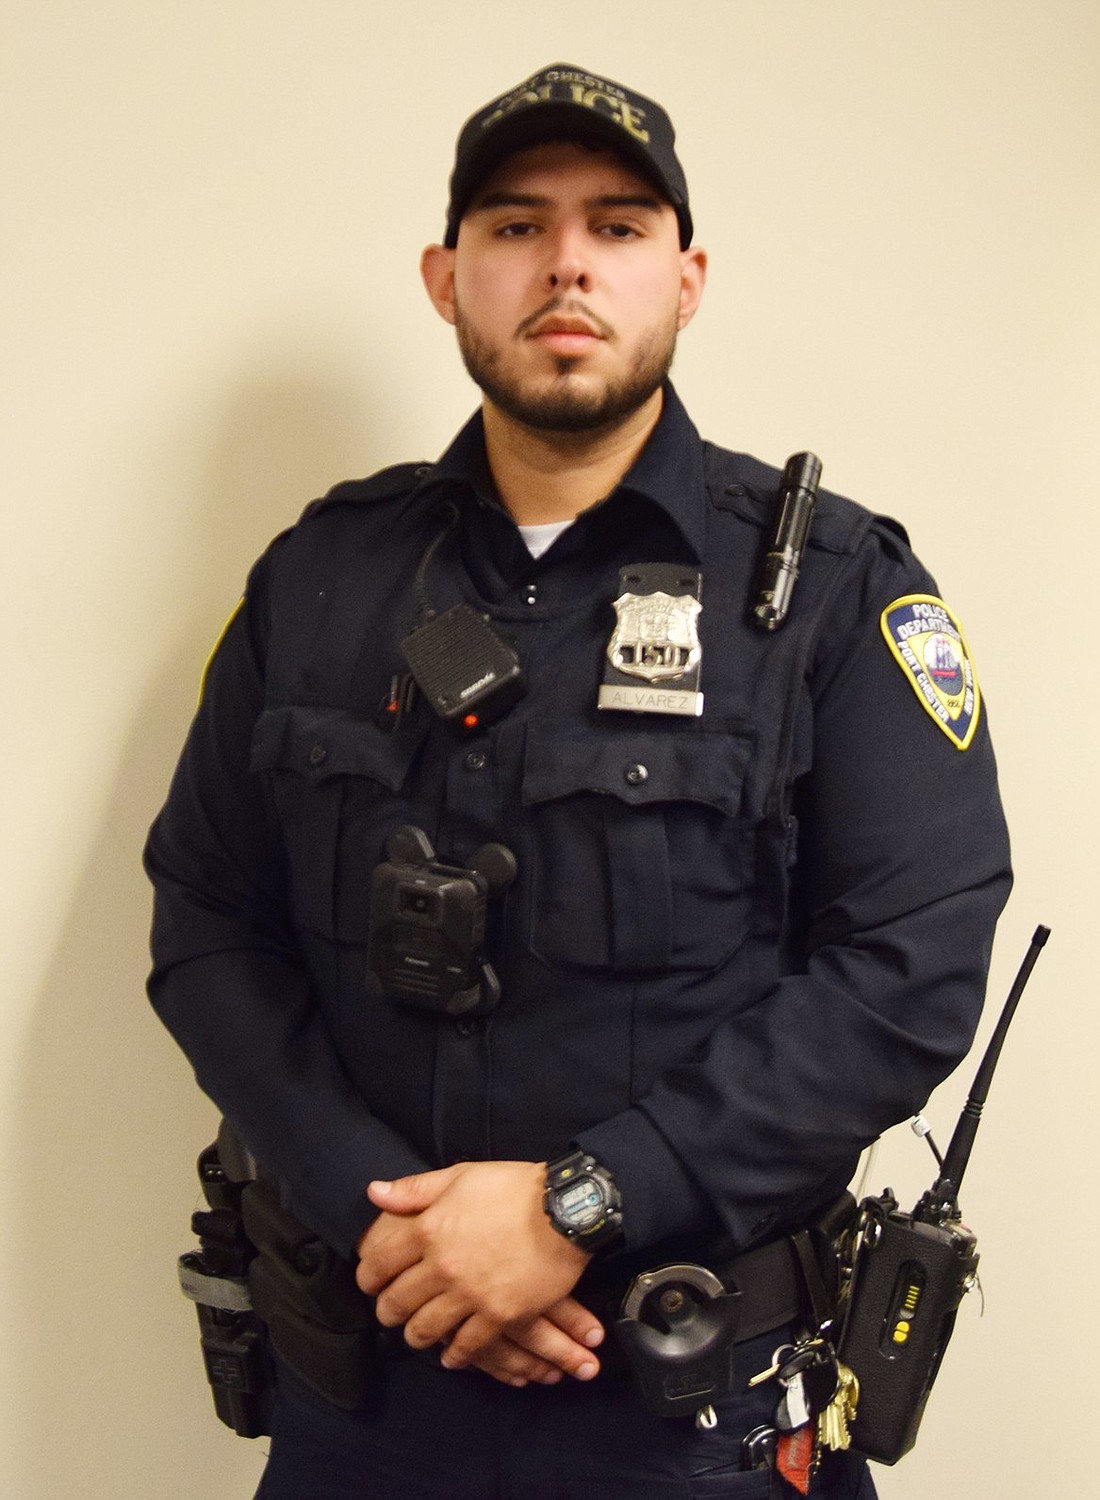 Lifelong Port Chester resident Stephen Alvarez poses for the camera inside the Port Chester police station on Tuesday, Nov. 21. Instated on Aug. 4, Alvarez said it marked the completion of a long journey.